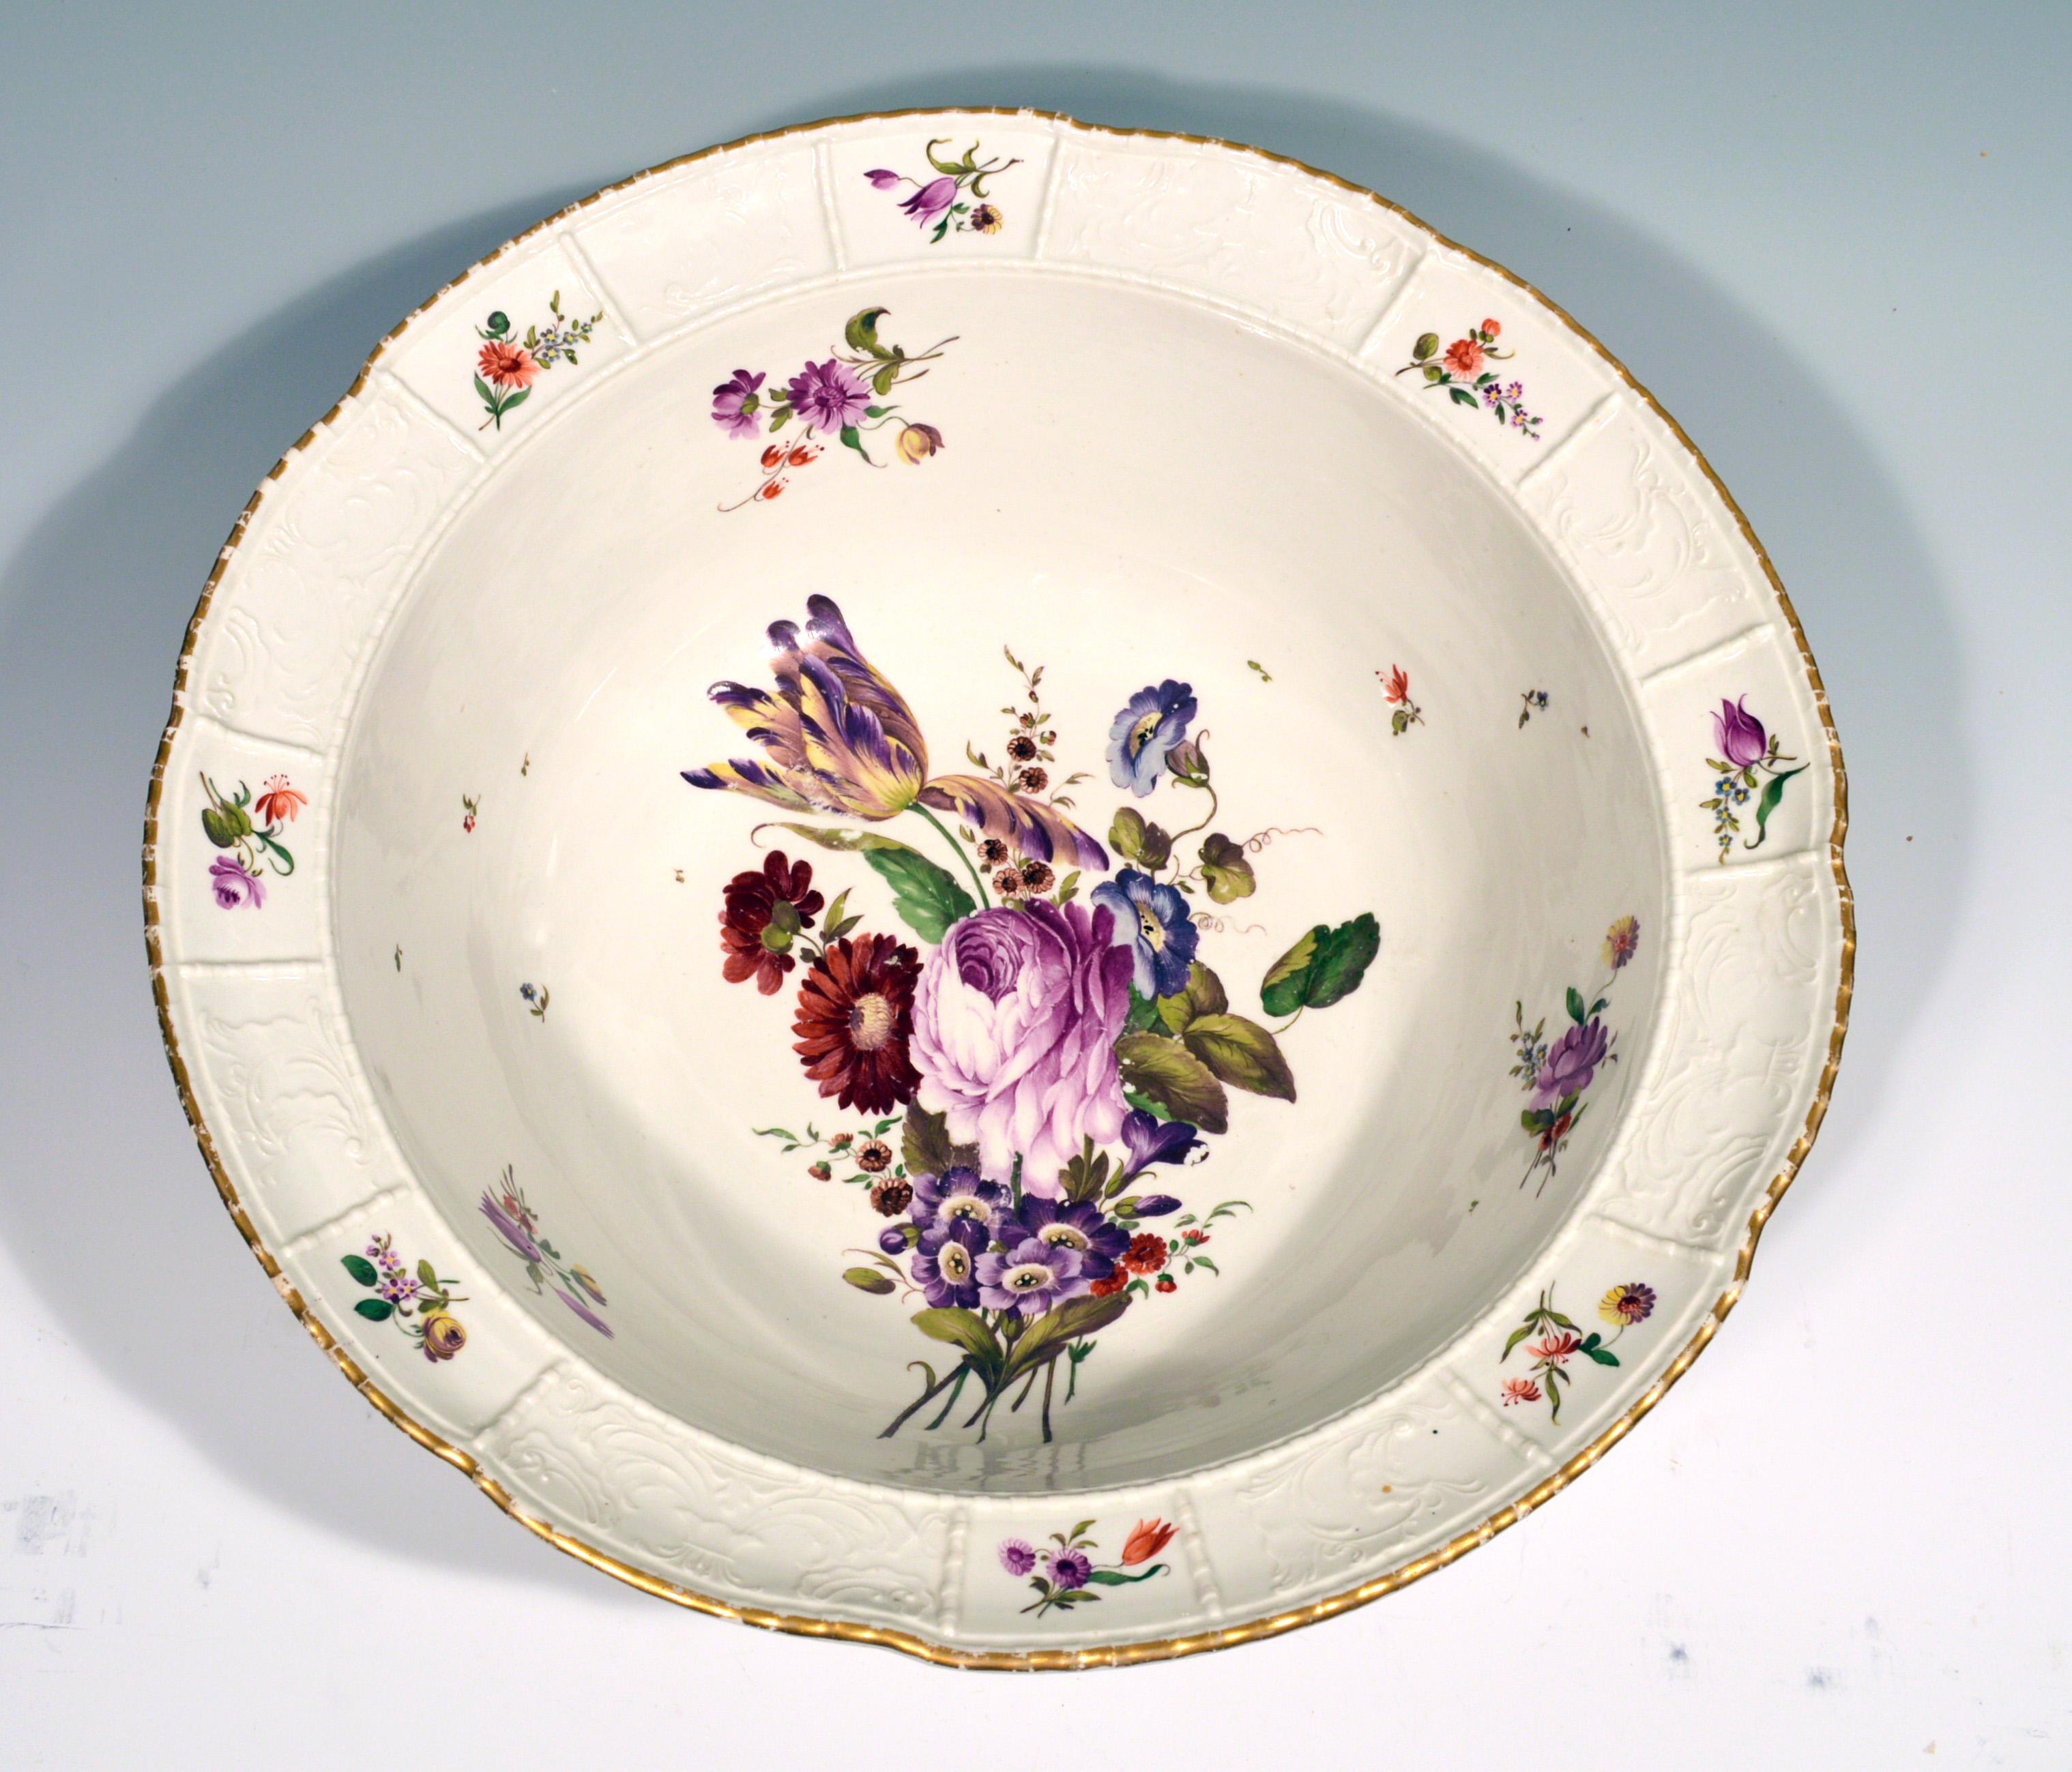 German porcelain large botanical bowl or basin, 
Ludwigsburg,
circa 1780.
(NY9095)

The large porcelain circular bowl or basin has a wide flaring rim. The rim is moulded with alternating rectangular panels with an undecorated moulded ribbon